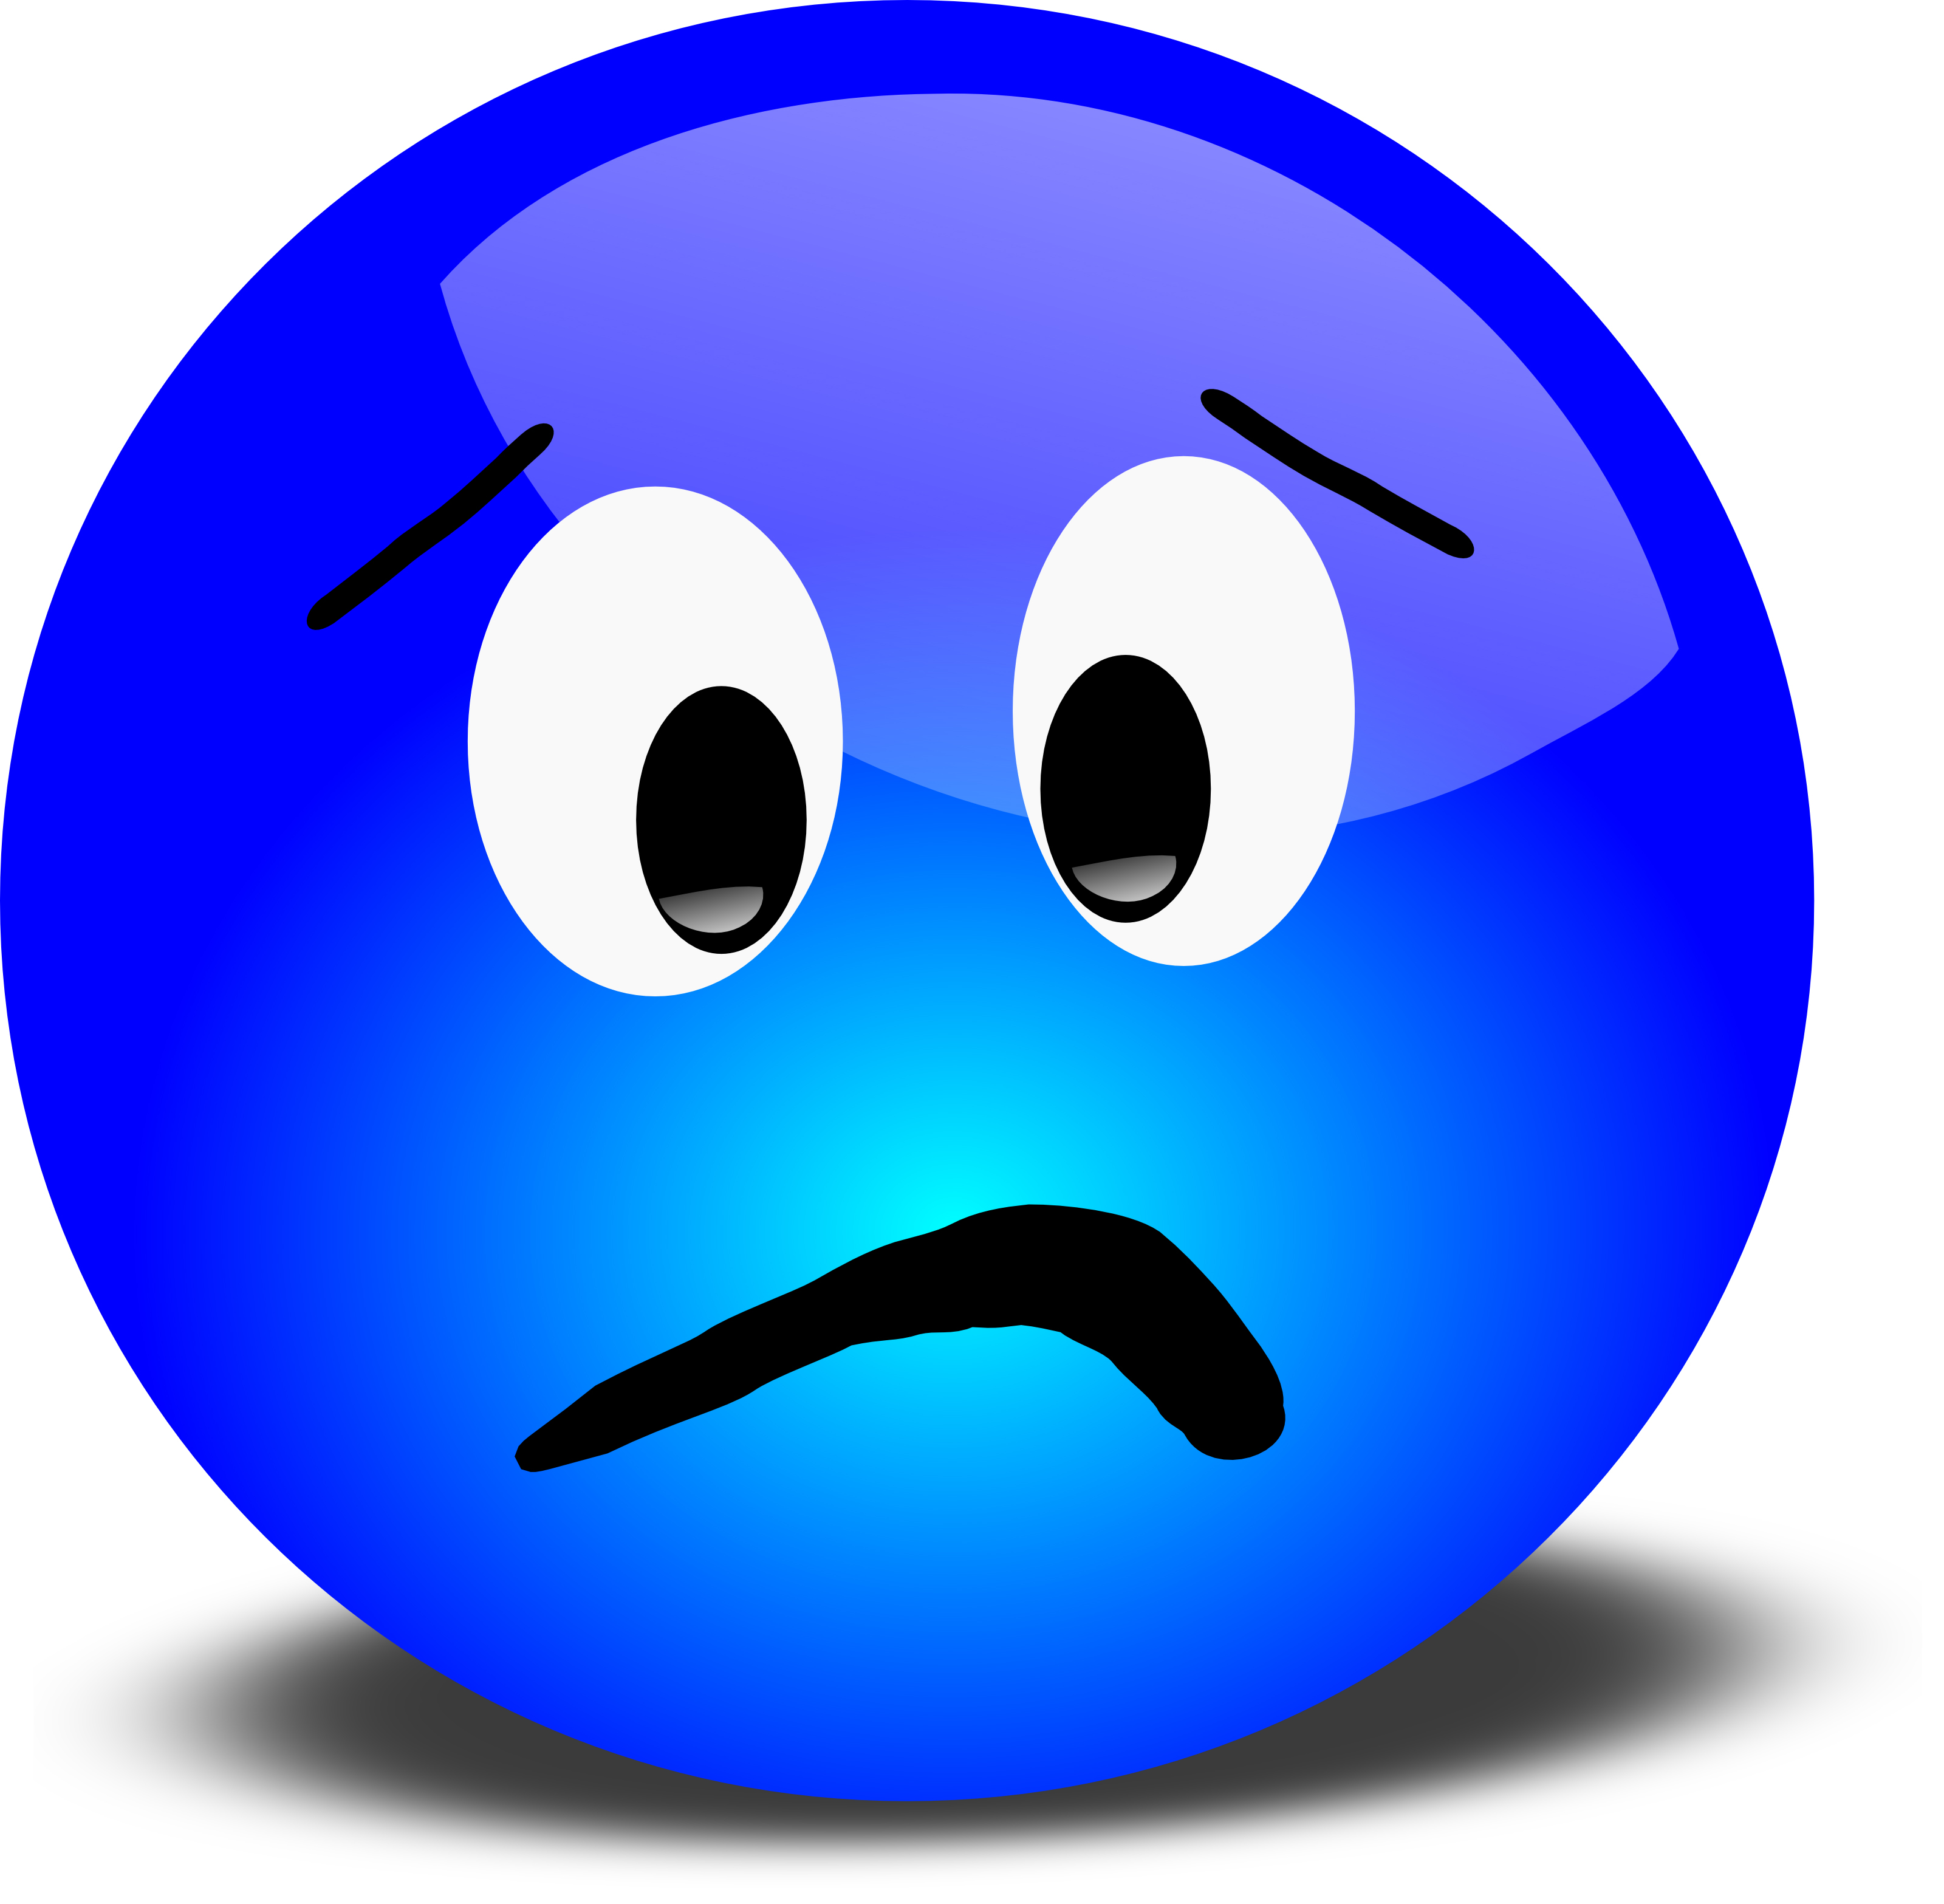 Frustrated Face Clip Art   Cliparts Co